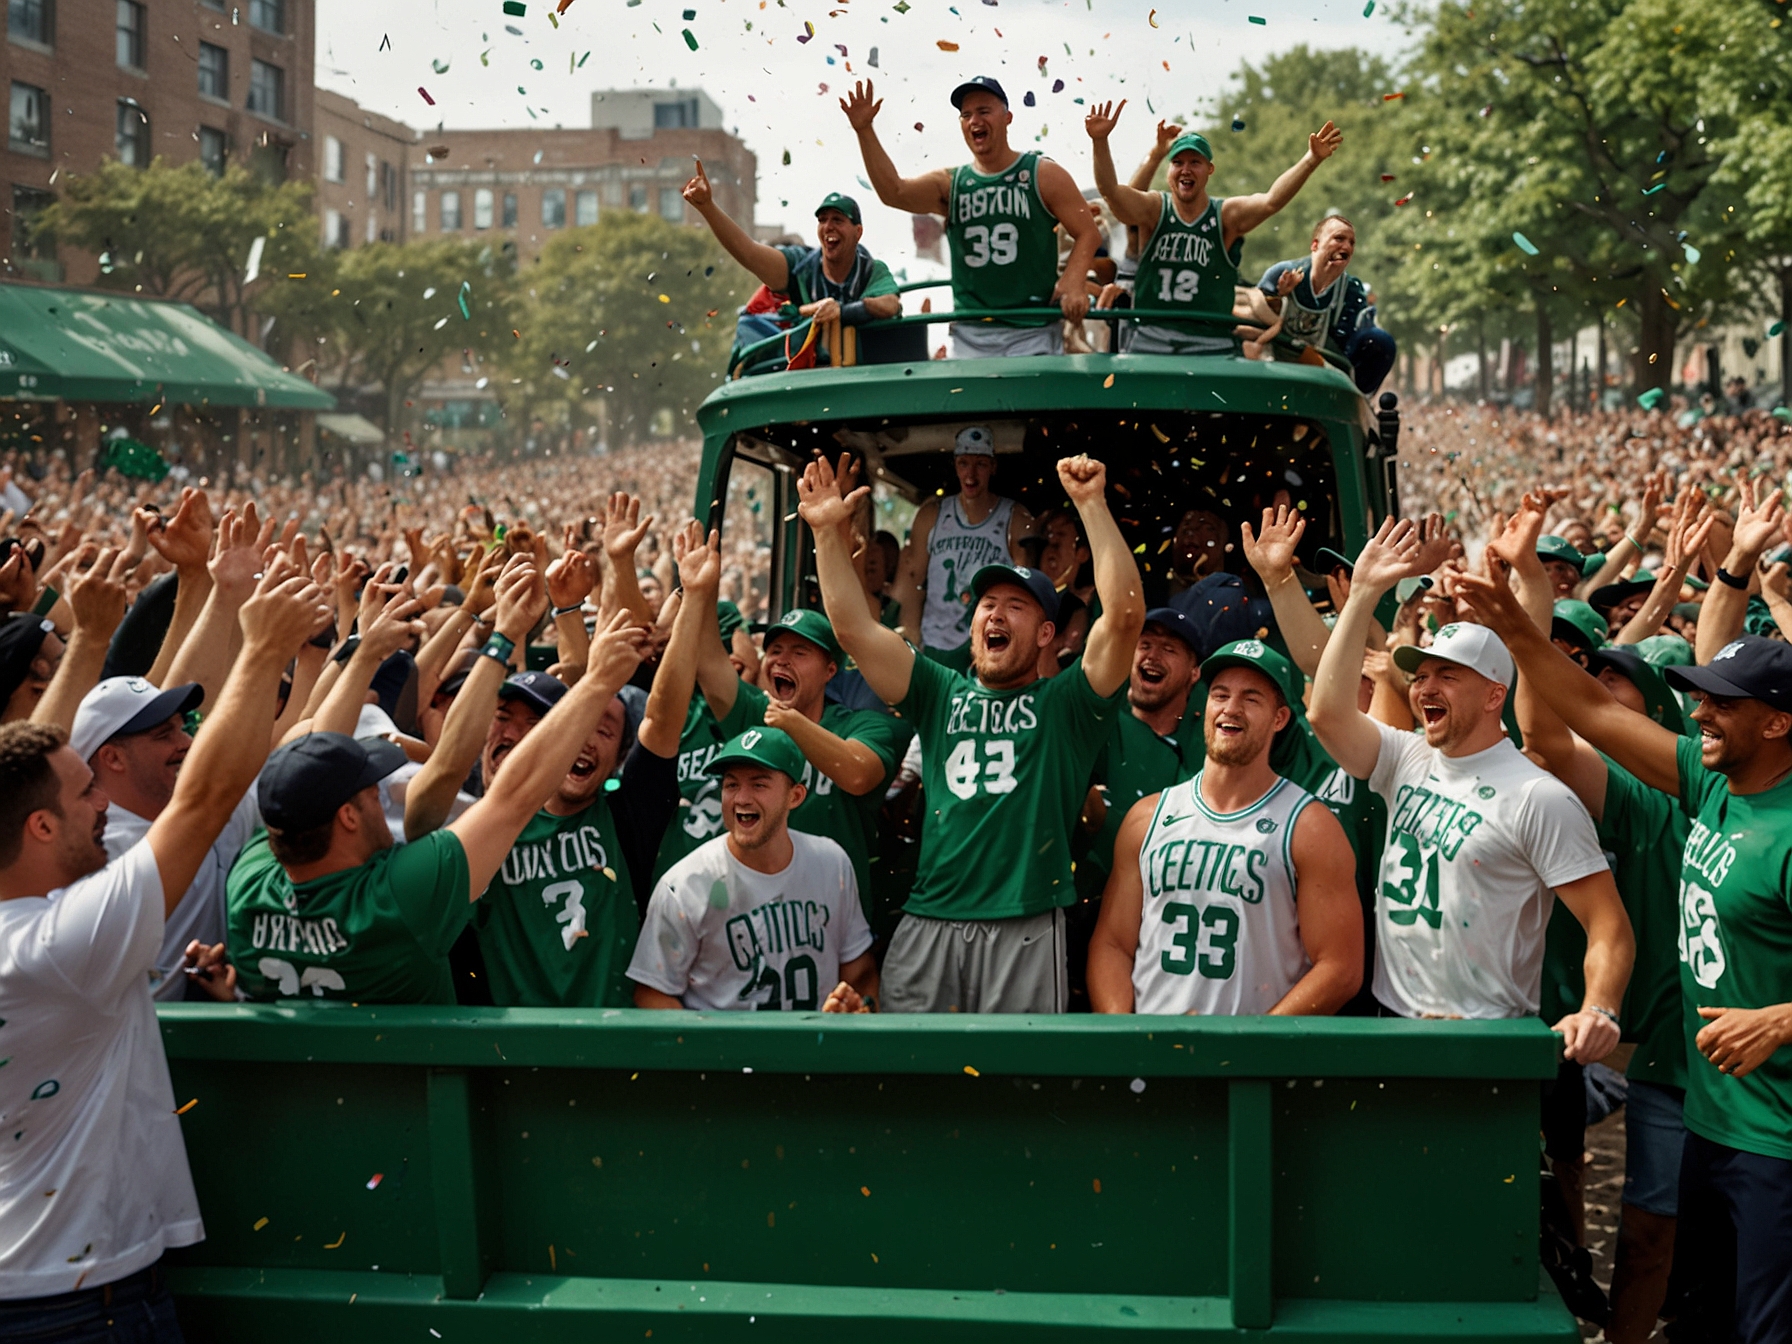 The Boston Celtics' players, coaches, and staff celebrating on duck boats, surrounded by a sea of green confetti and joyful fans, commemorating their record-breaking 18th NBA championship win.